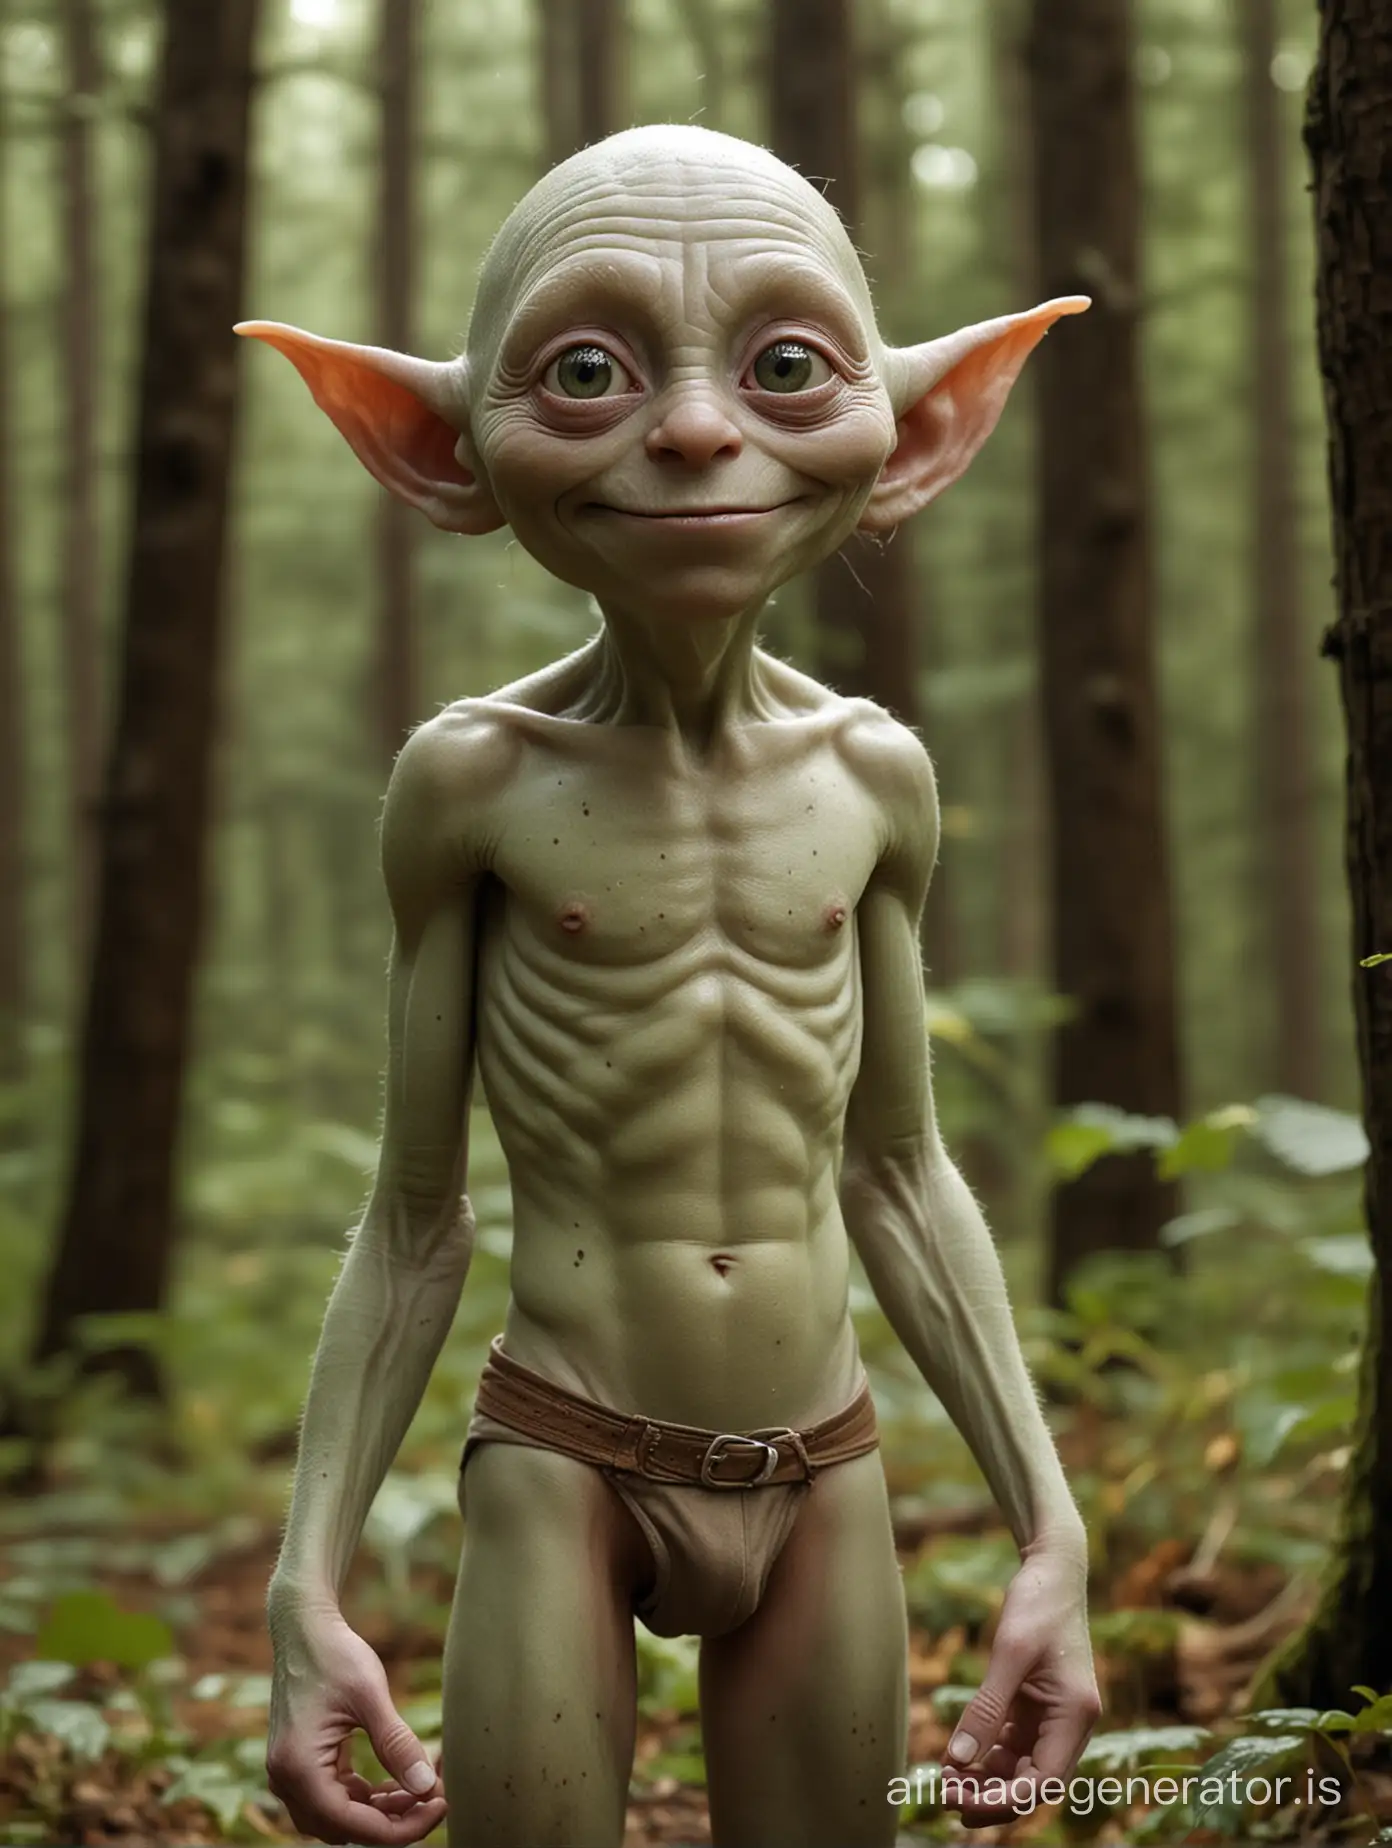 A very young goblin-boy with a boyish face. Shown in long shot. He has very smooth pale green skin. He has a large, round head with large, square eyes. A tiny snub nose and a wide mouth with two tiny fangs sticking out of it. His facial skin is very soft and smooth. He has big floppy ears. He is bald, except for a single tuft of reddish-brown hair in the middle of his head. His figure is very slim and yet he has a round stomach. He has large freckles all over him. His arms and legs are very thin. His upper body is free. Full body in long shot. He stands just in brown underwear in a dark forest.